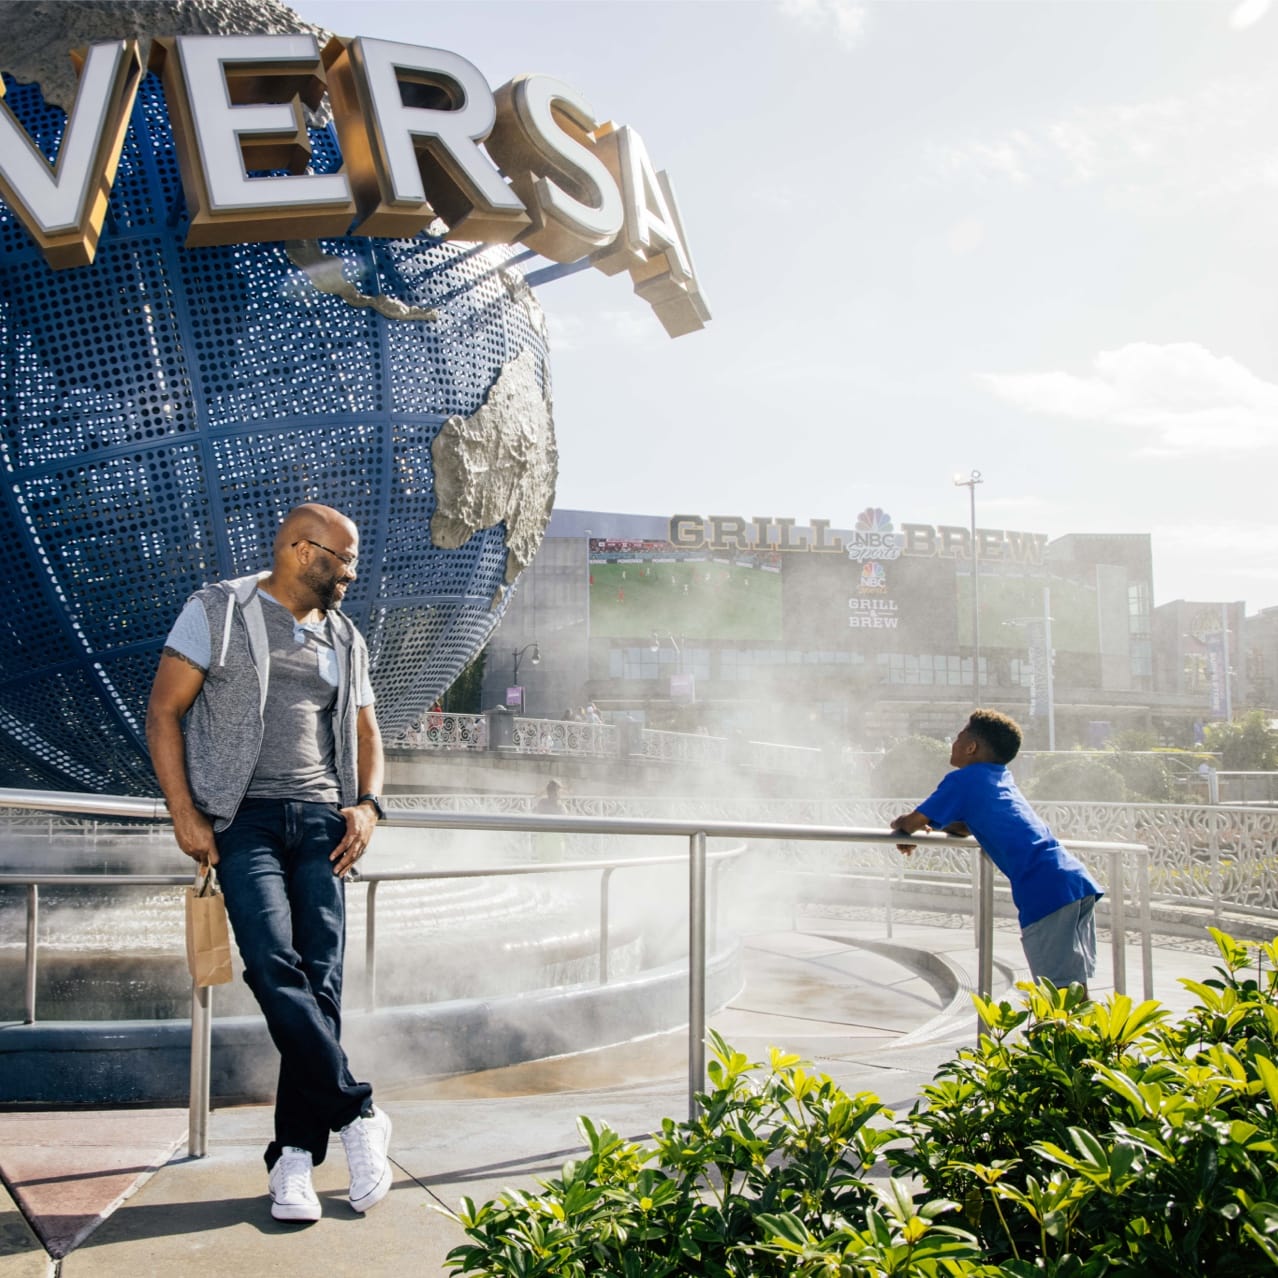 A tour of the Universal Orlando theme parks - Shoot from the Trip